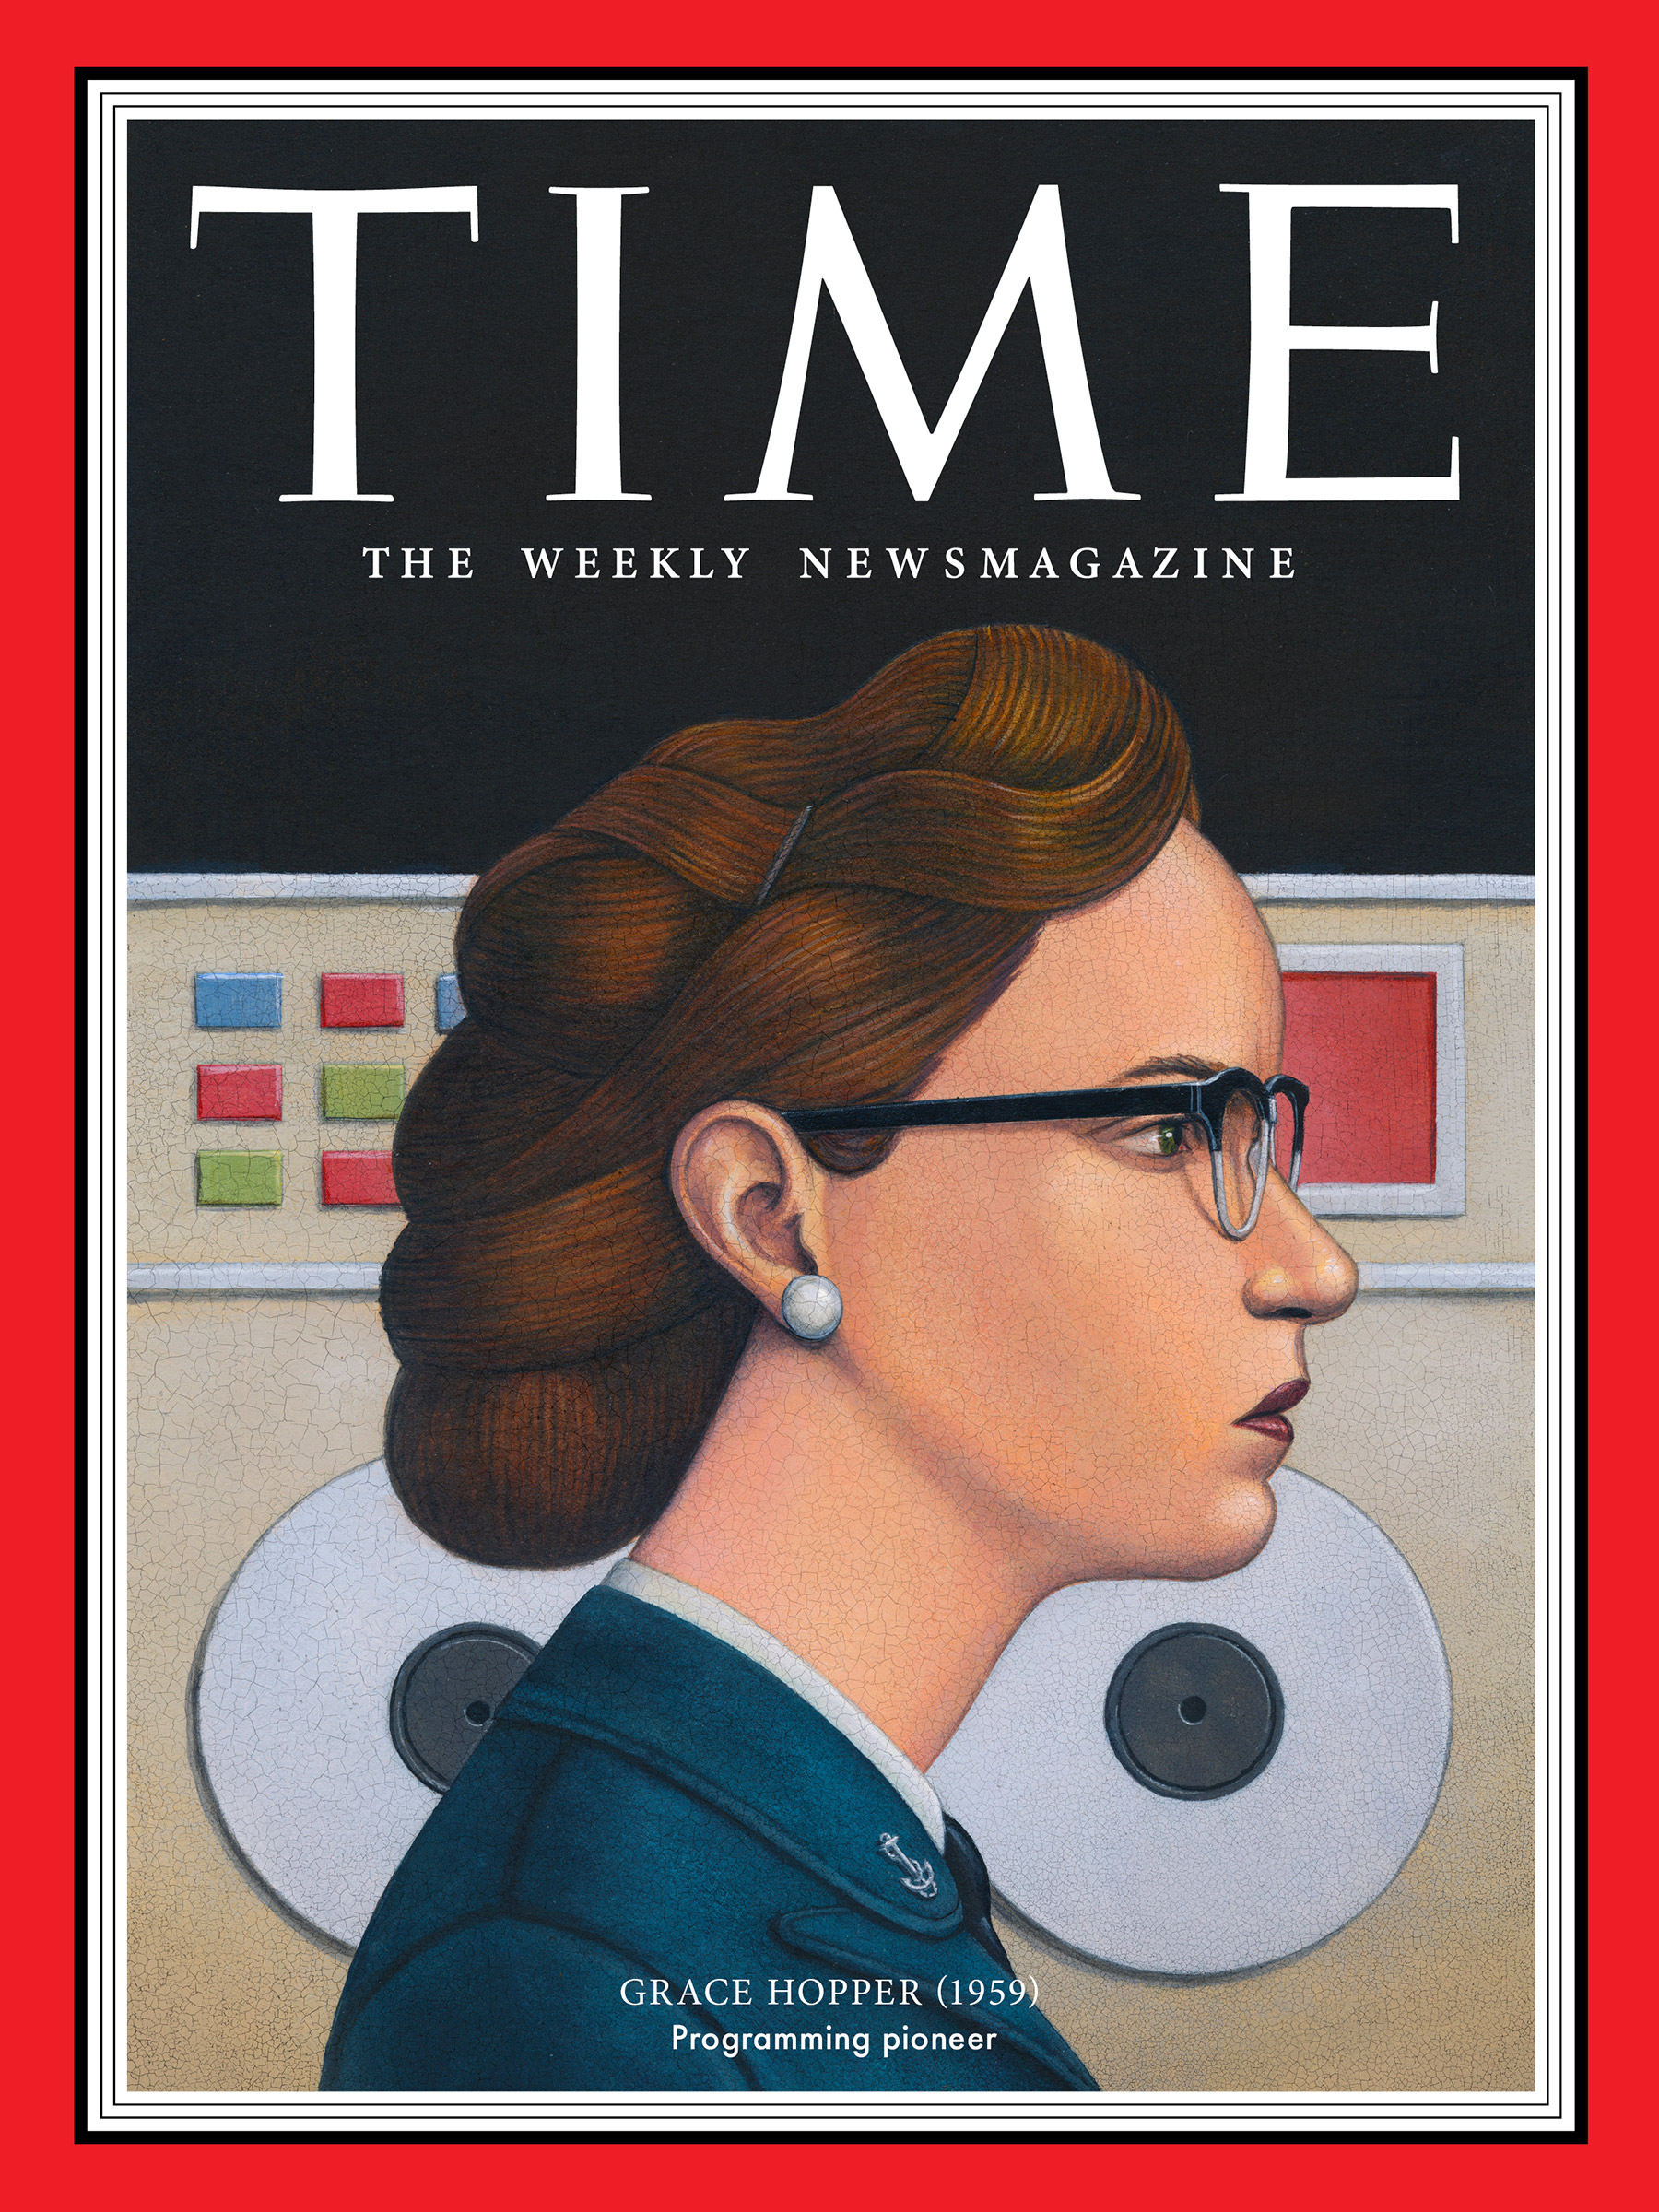 <a href="https://fineartamerica.com/featured/grace-hopper-1959-time.html"><strong>Buy the cover art→</strong></a> (Illustration by Marc Burckhardt for TIME; Alamy)